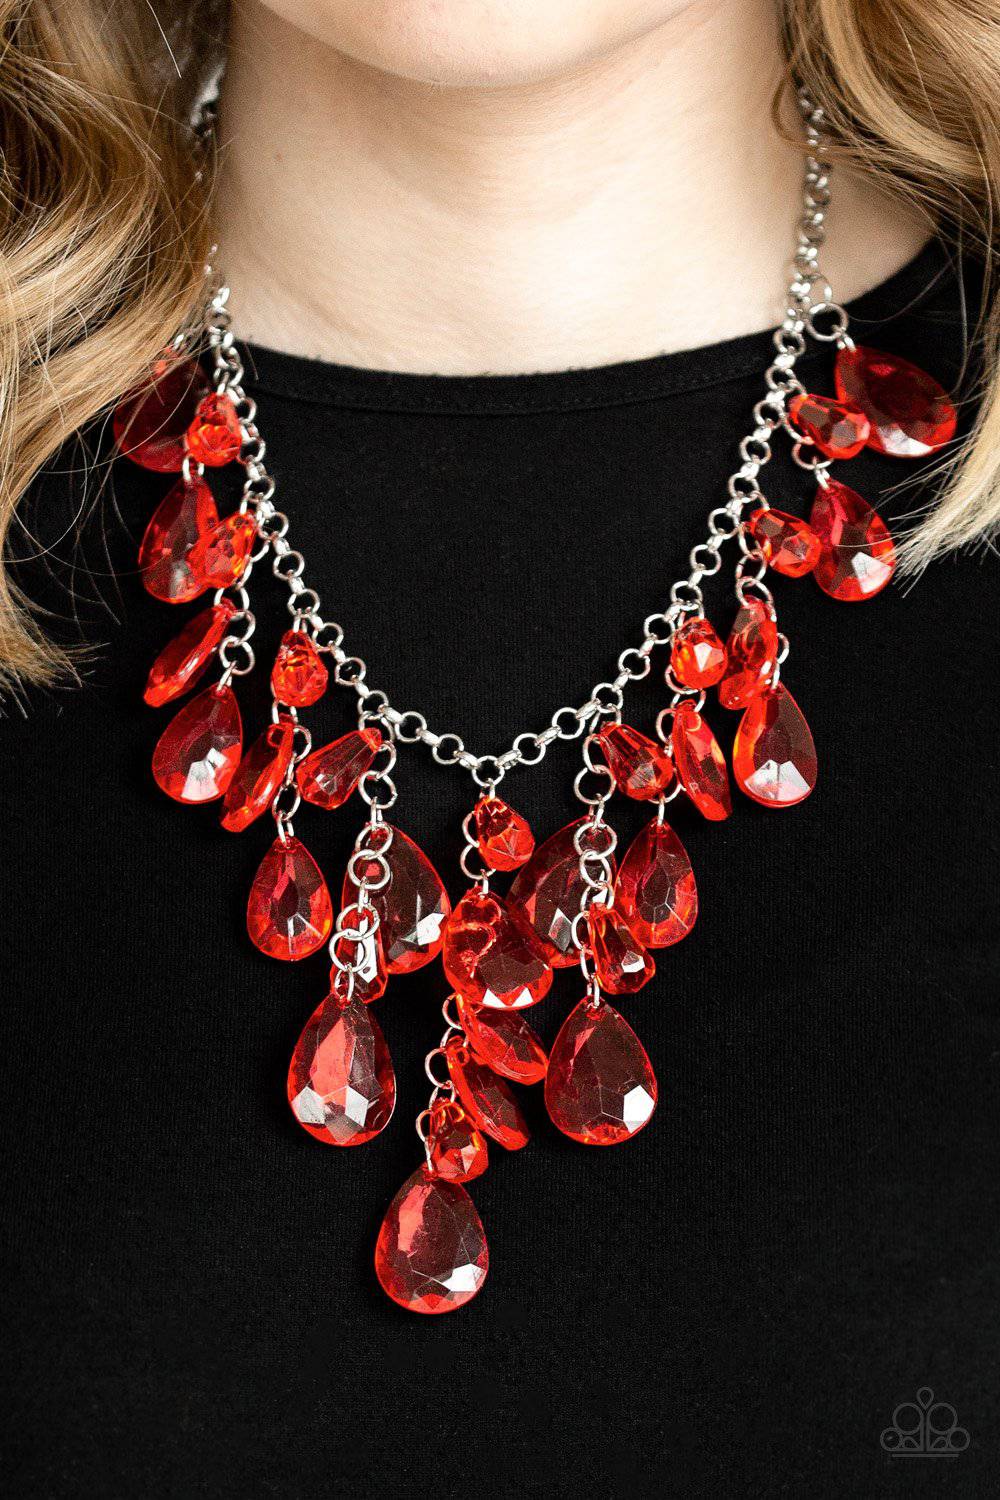 Irresistible Iridescence - Red Necklace - Paparazzi Accessories - GlaMarous Titi Jewels